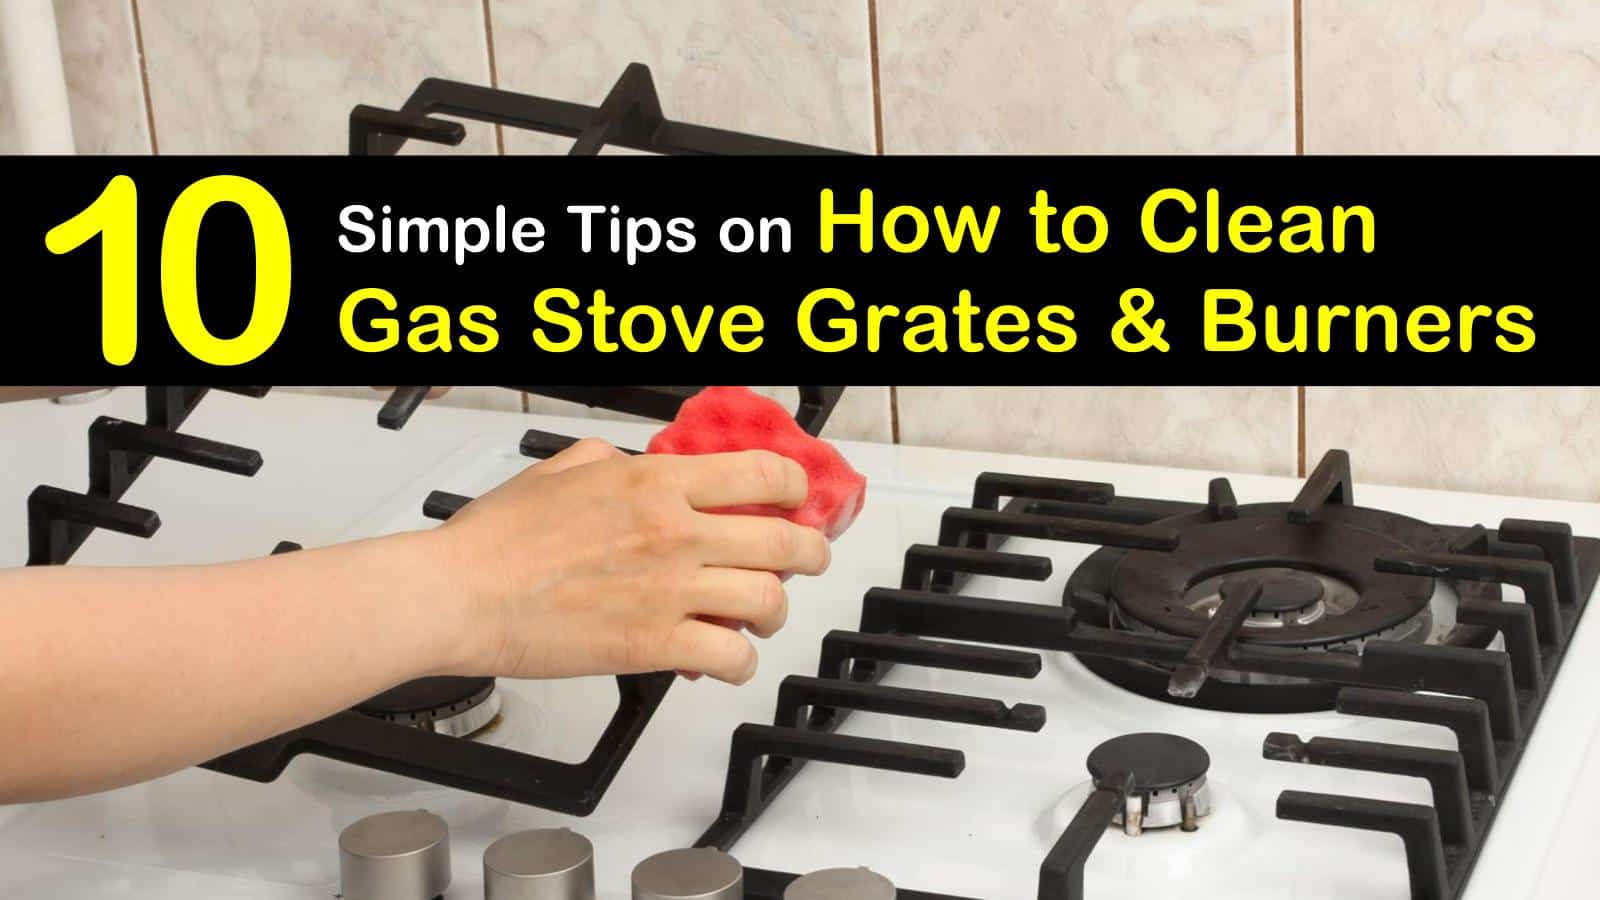 how to clean gas stove grates titleimg1